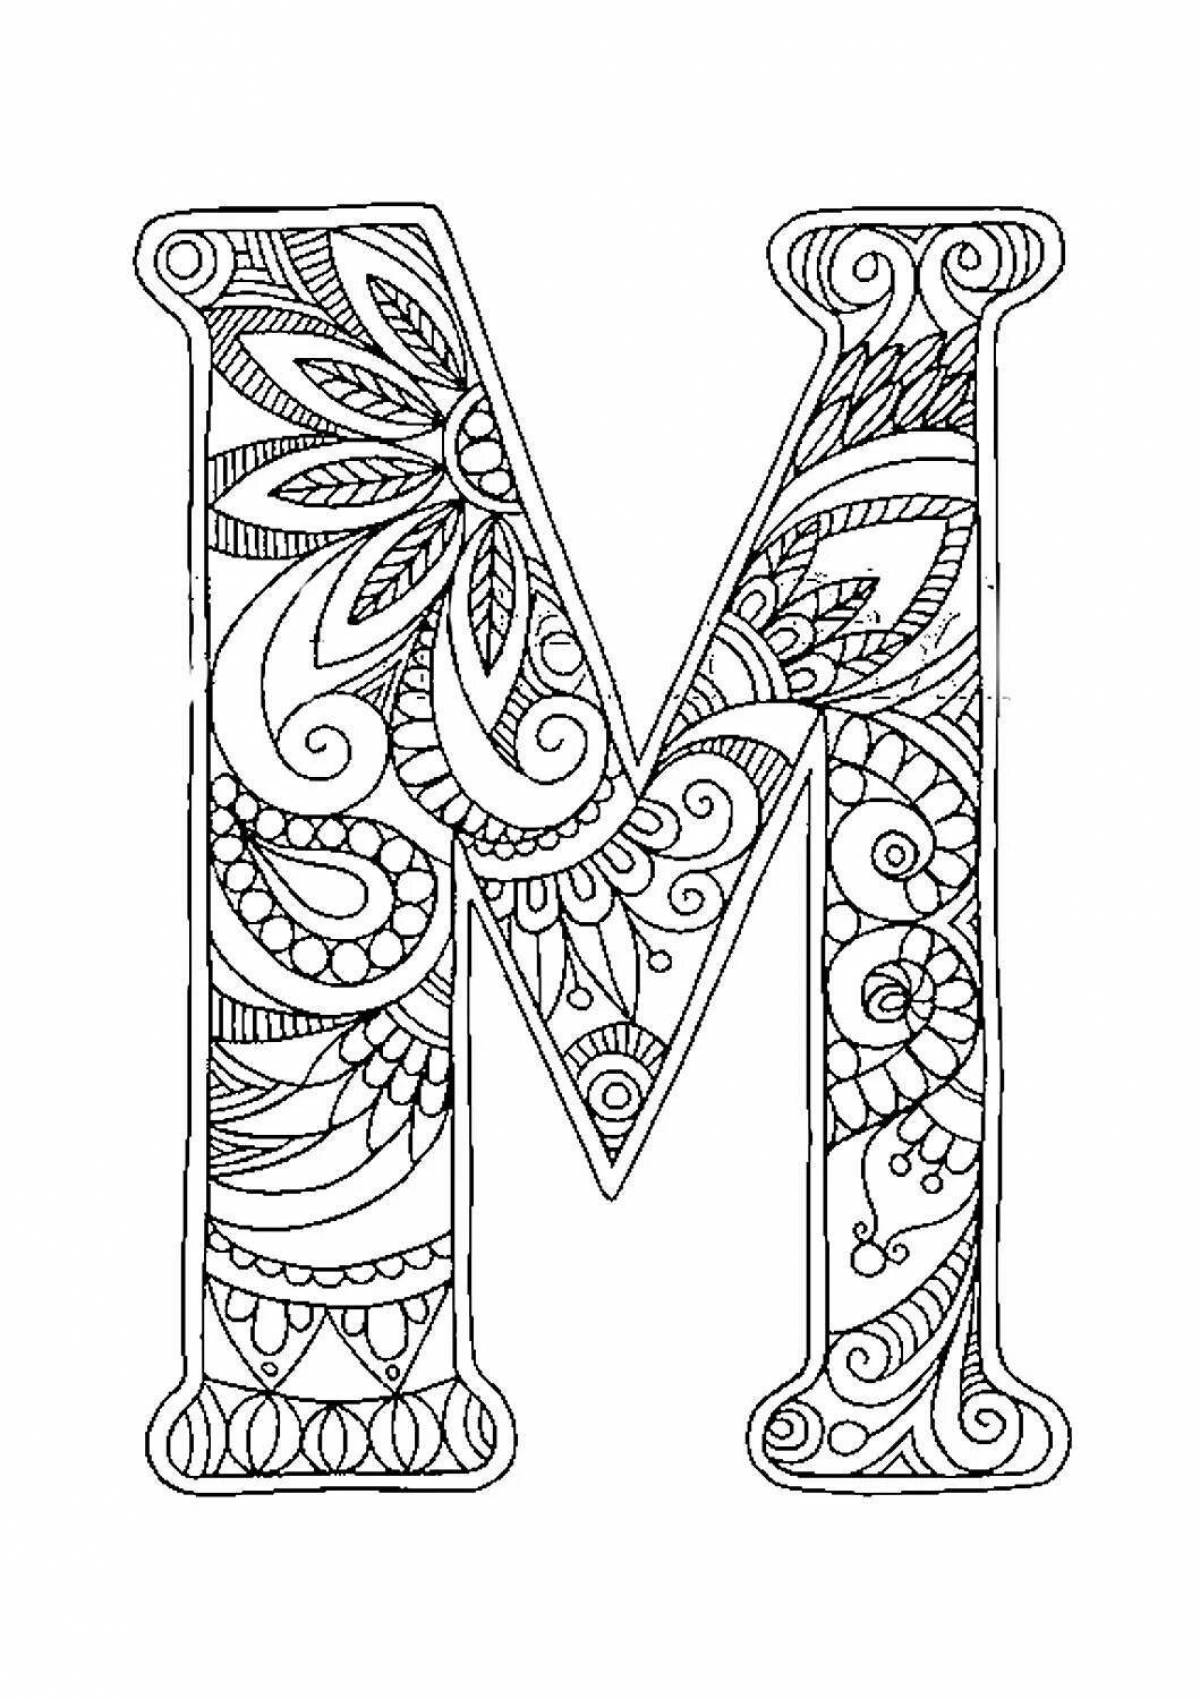 Colorful playful coloring page initial letter